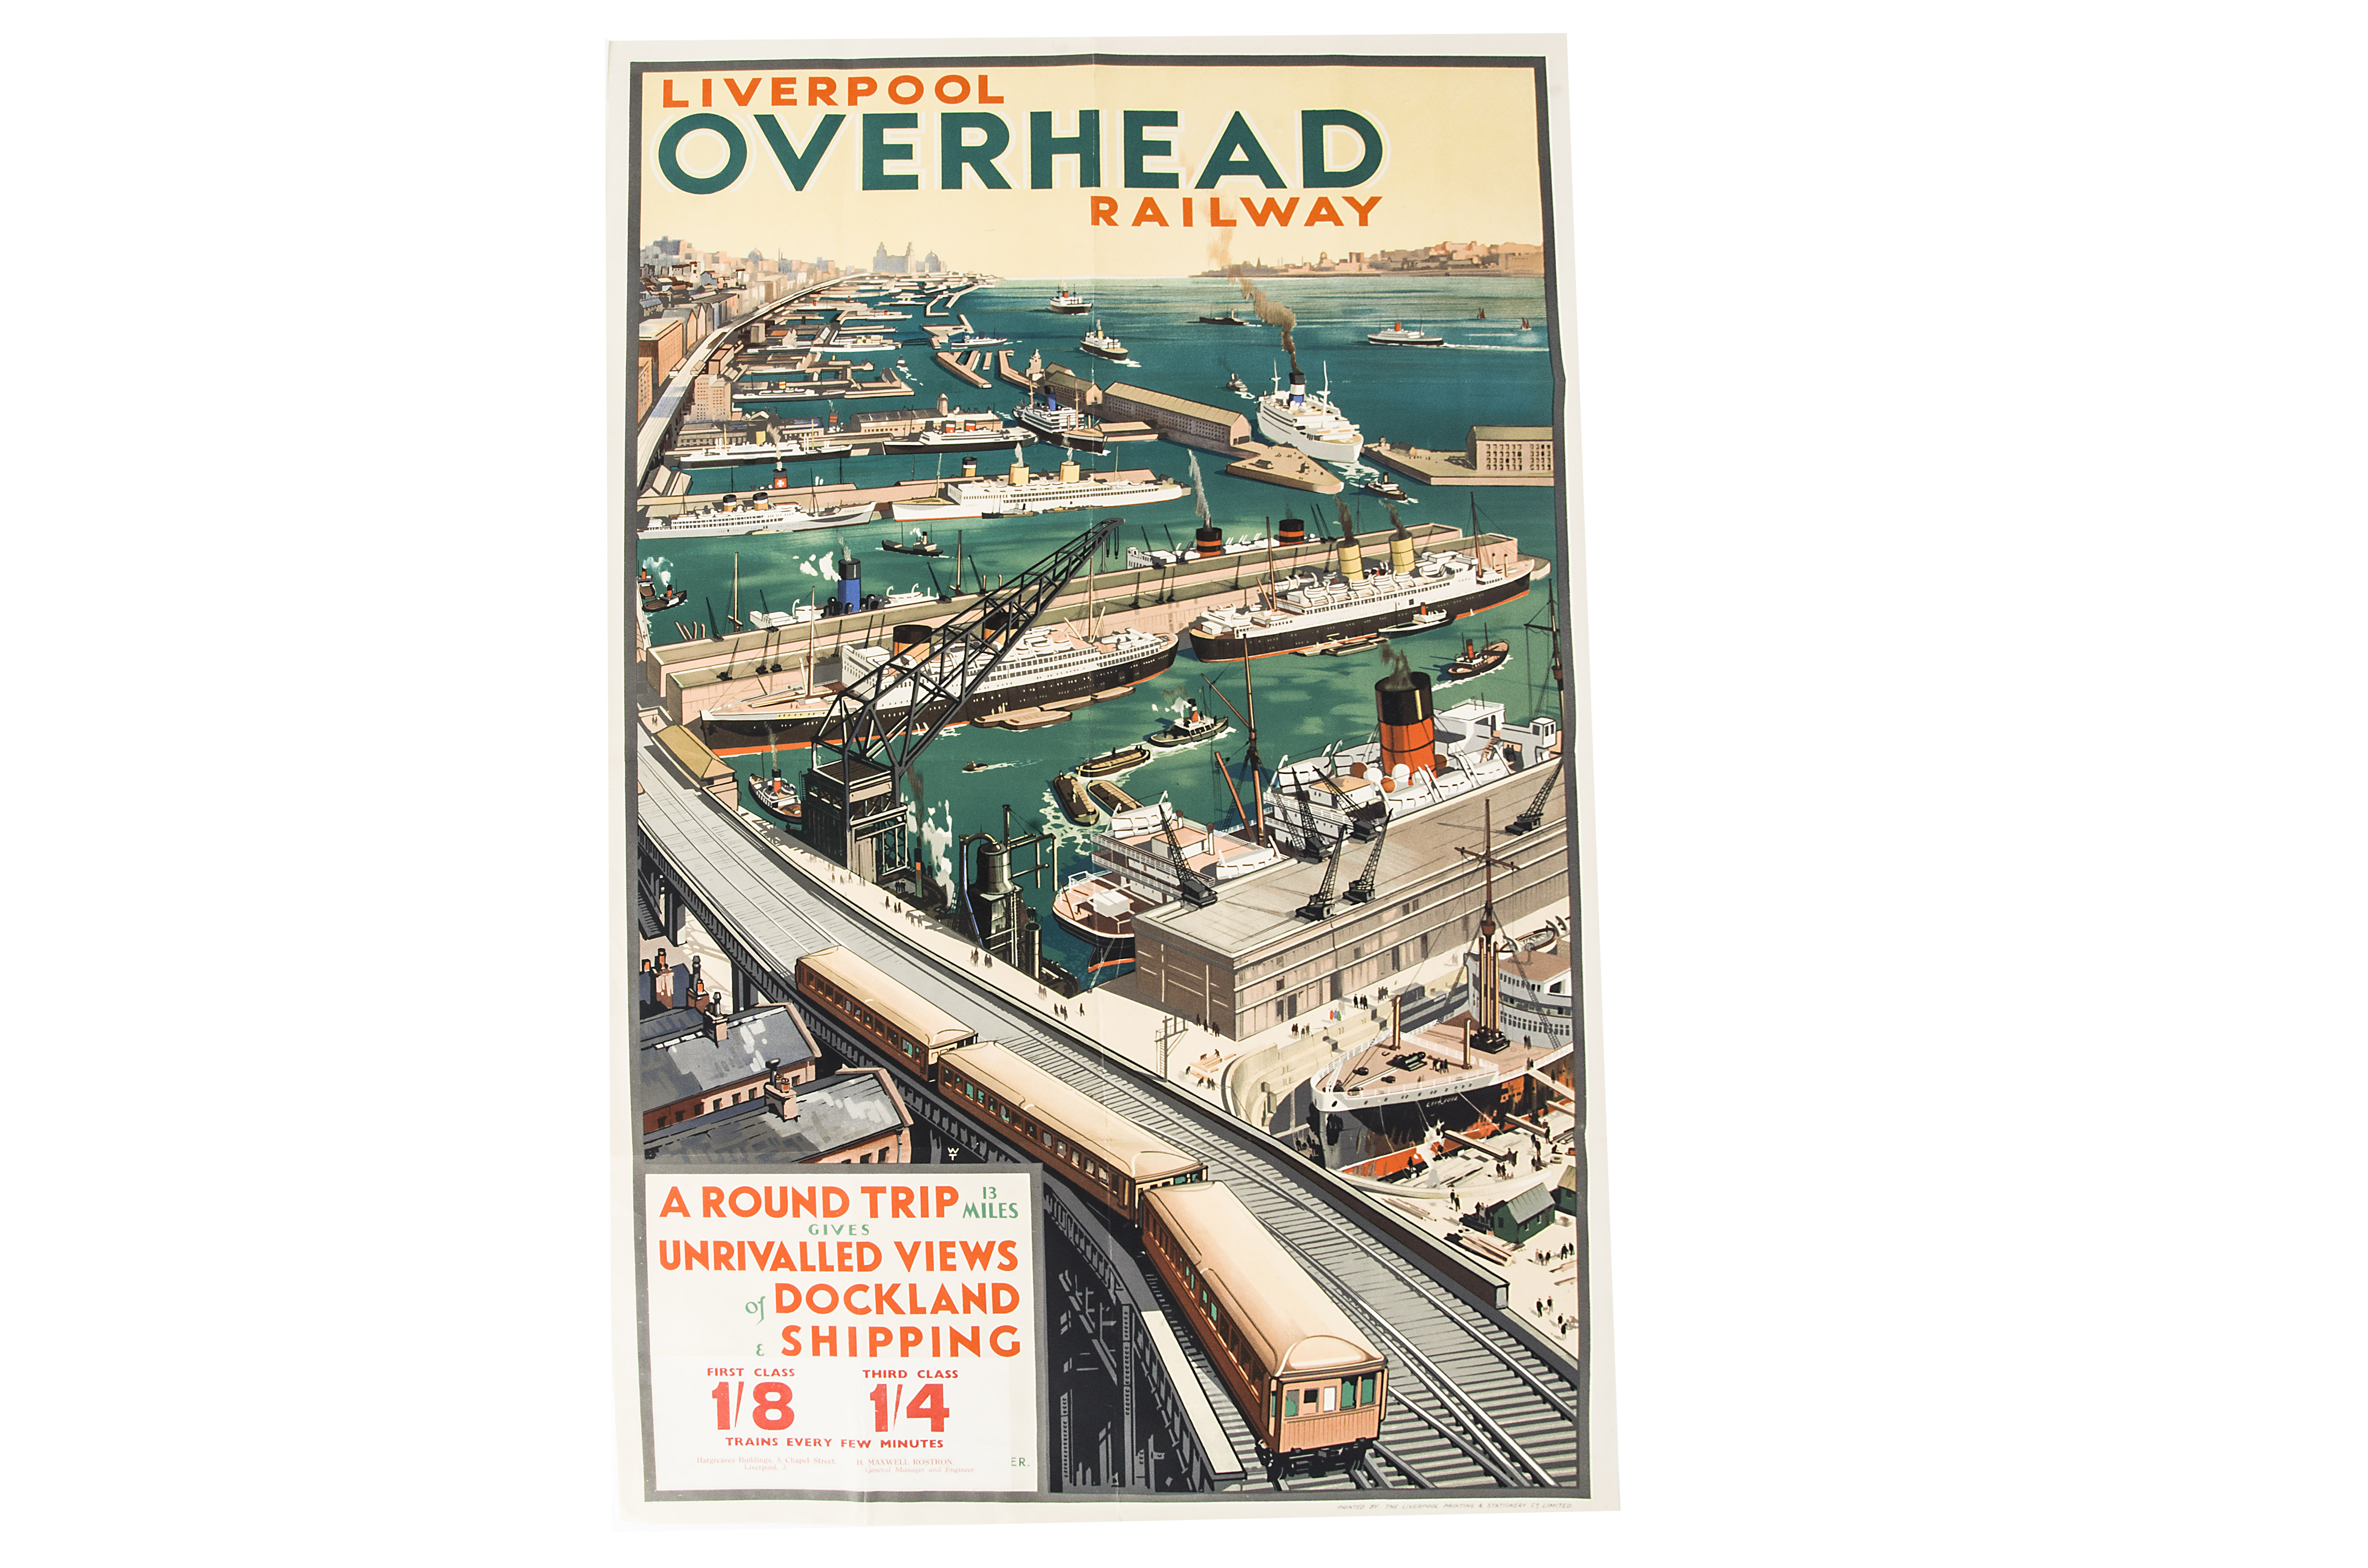 A Liverpool Overhead Railway Poster, printed by The Liverpool Printing & Stationery Co Ltd,